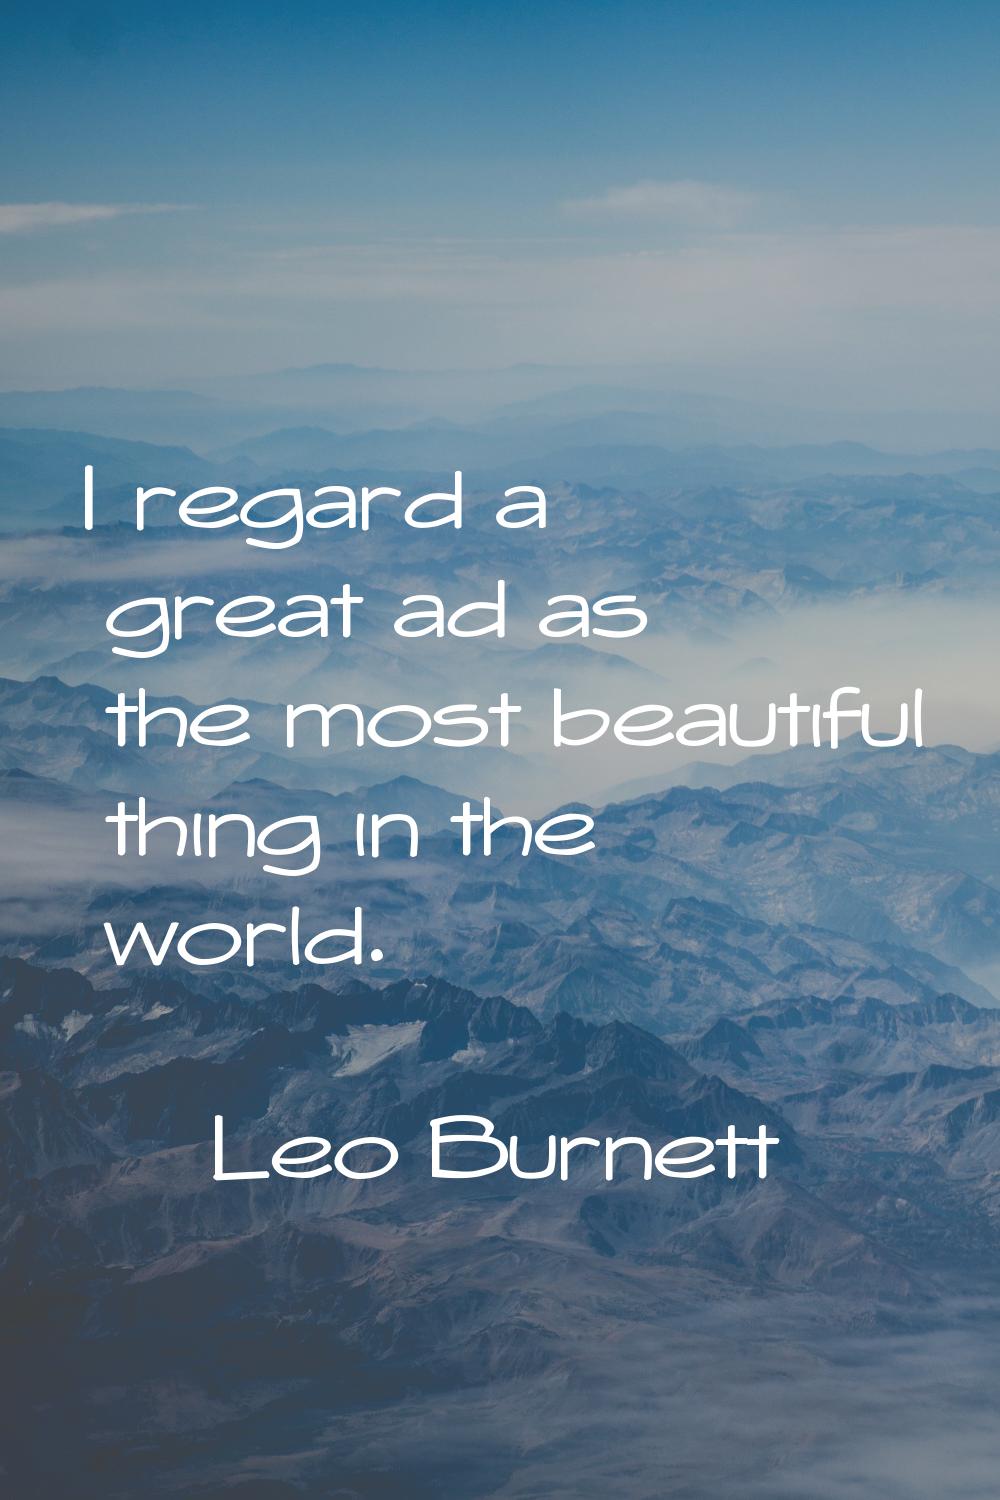 I regard a great ad as the most beautiful thing in the world.